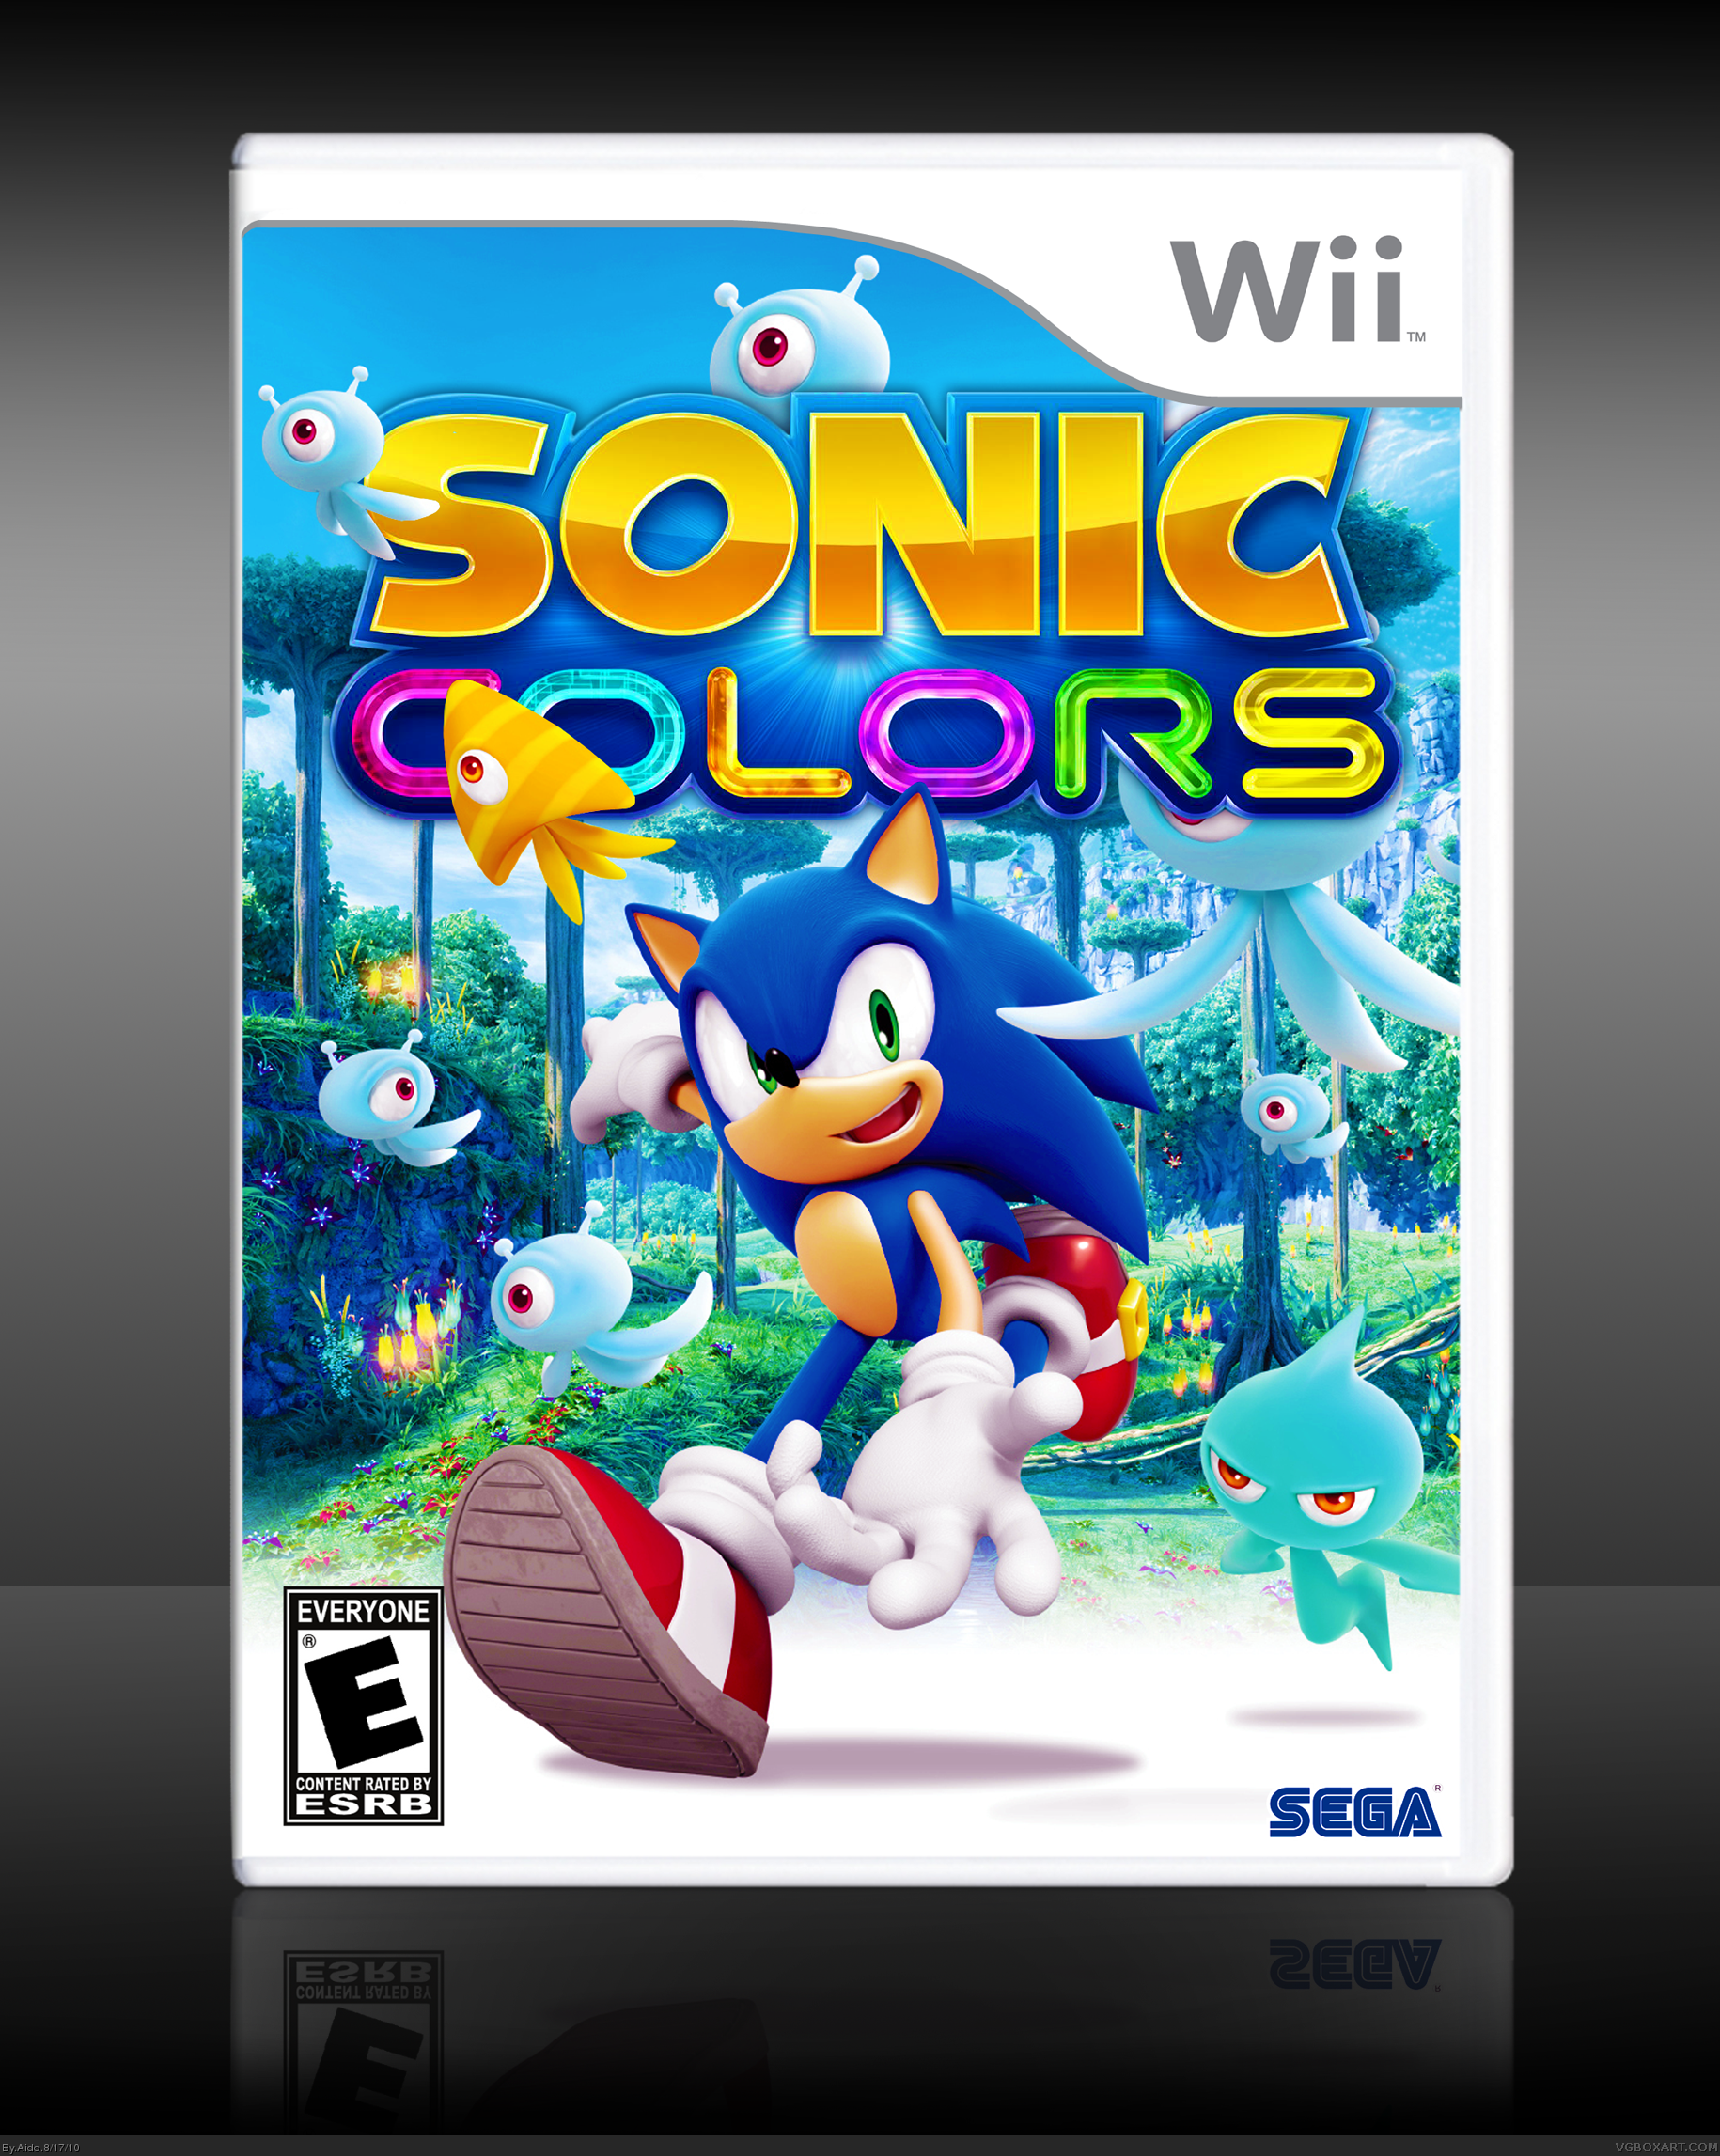 Sonic Colors box cover